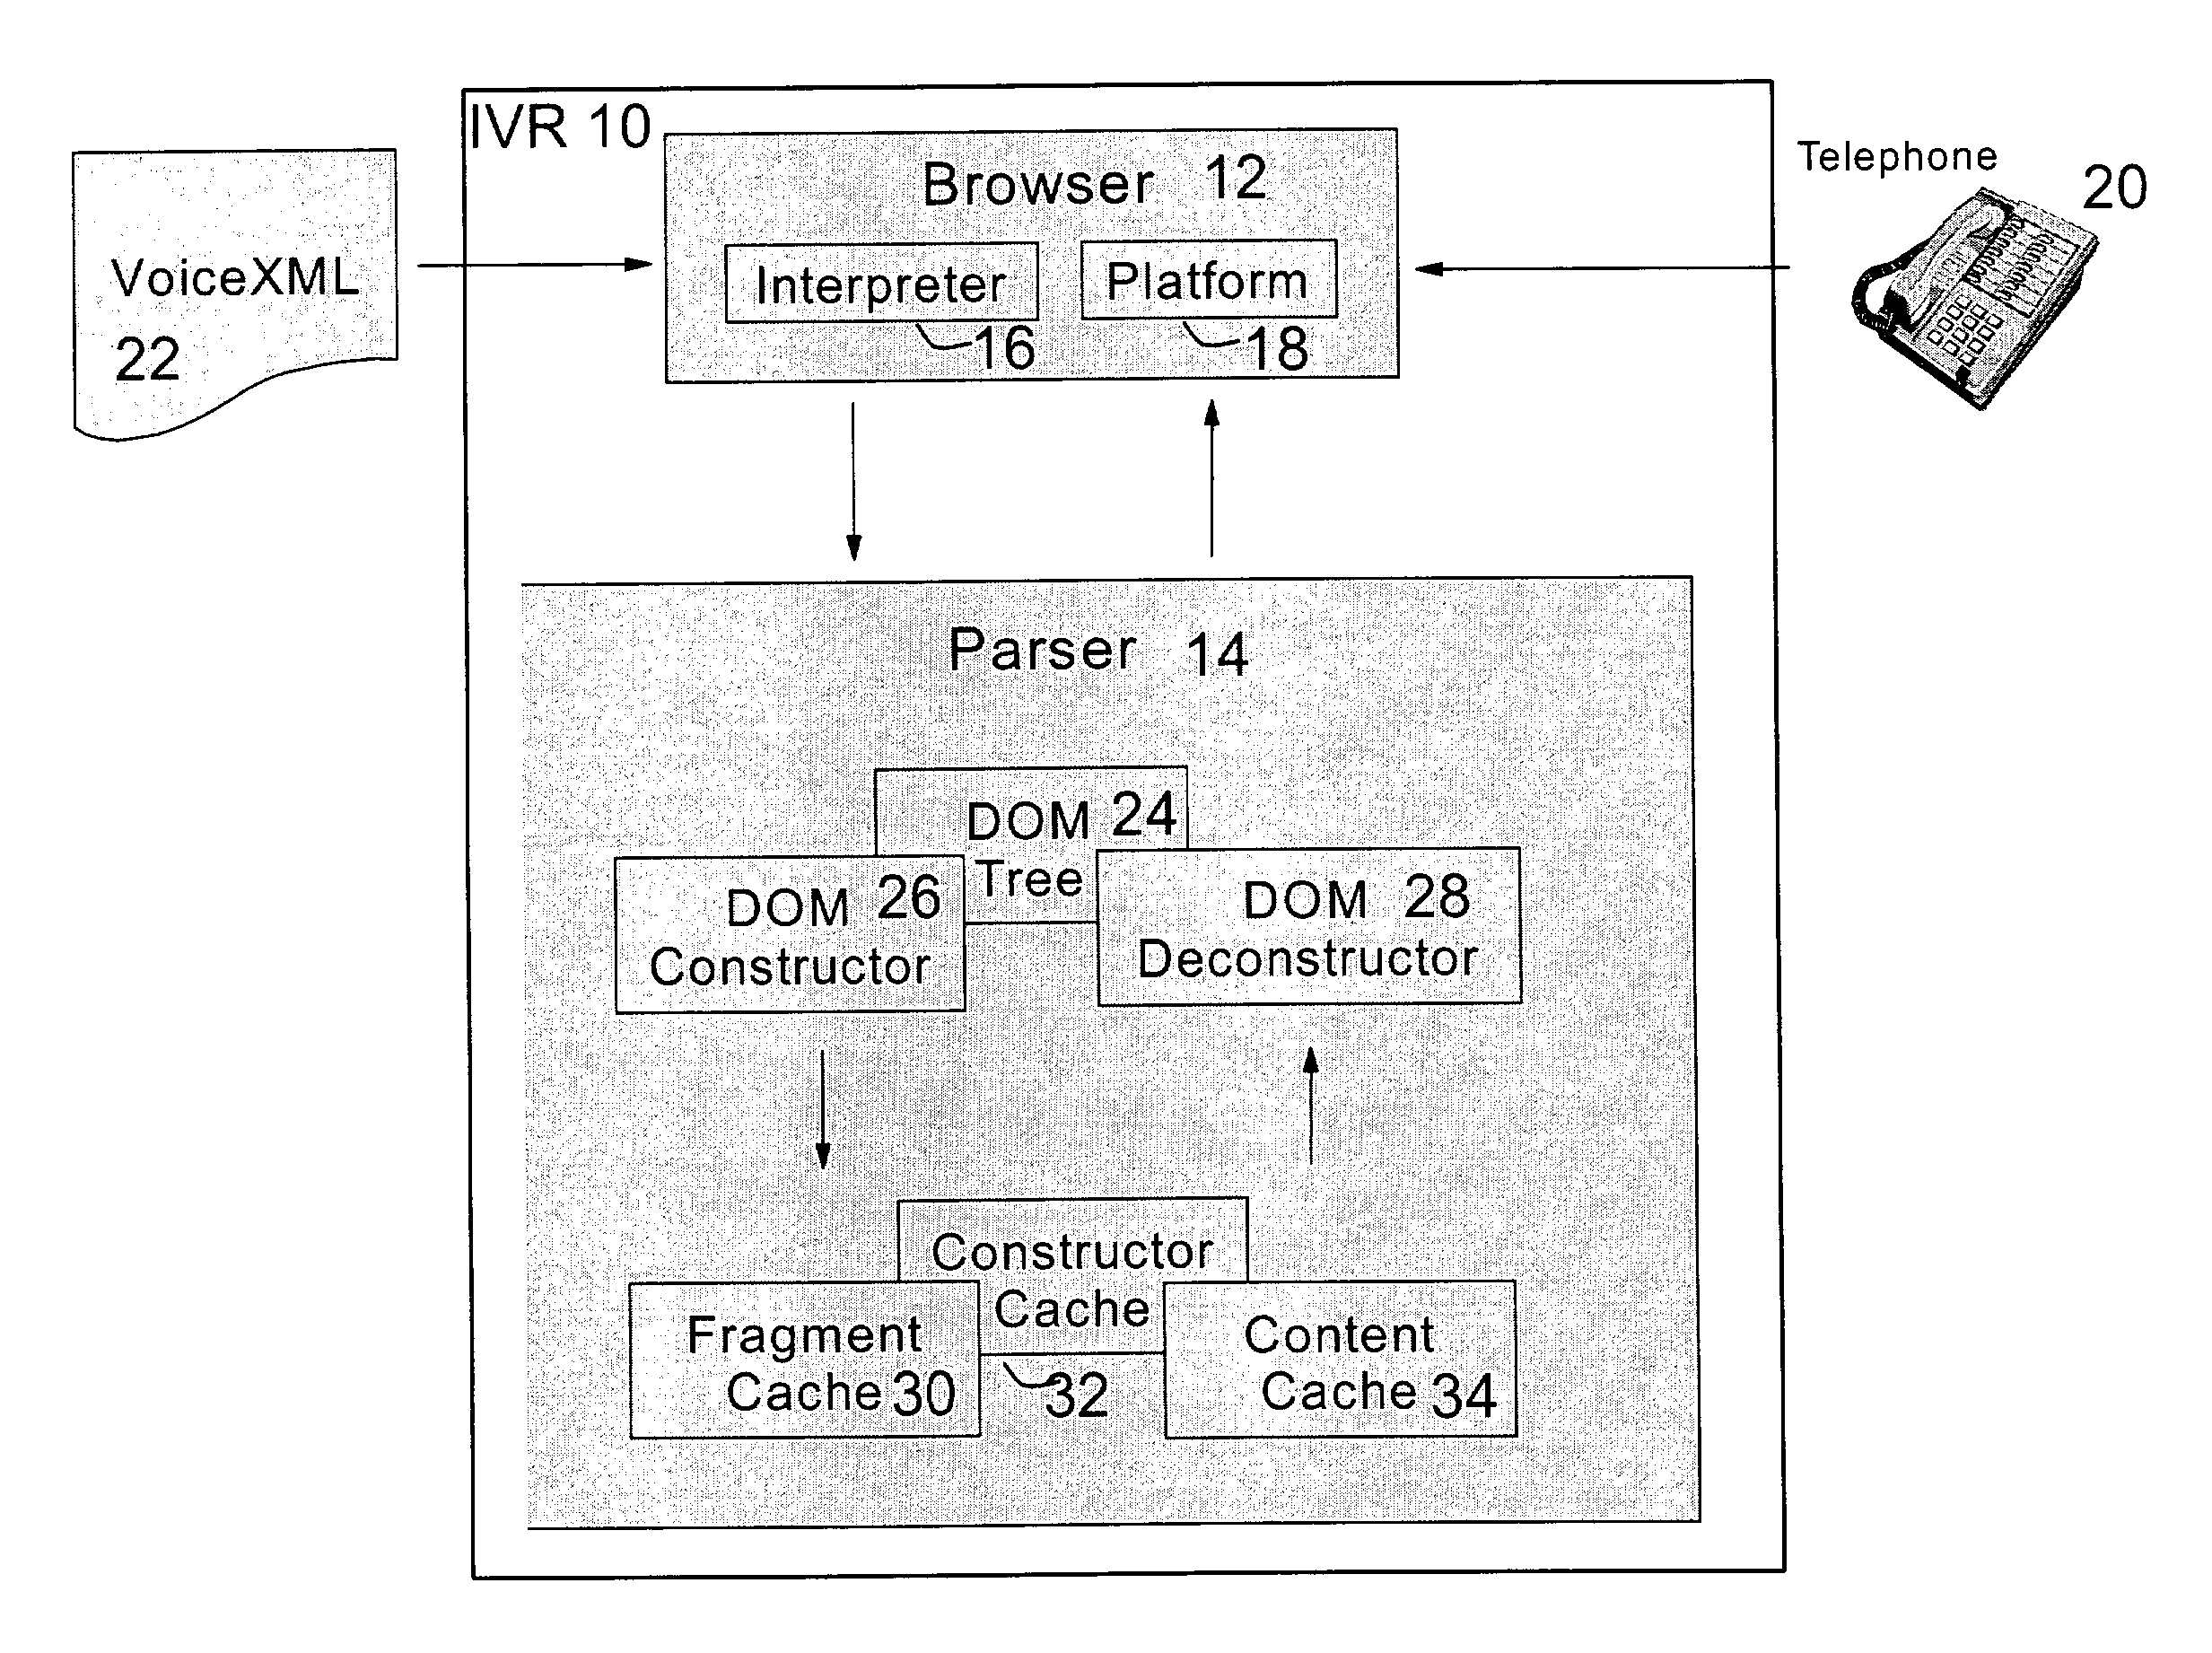 Method and apparatus for caching VoiceXML documents